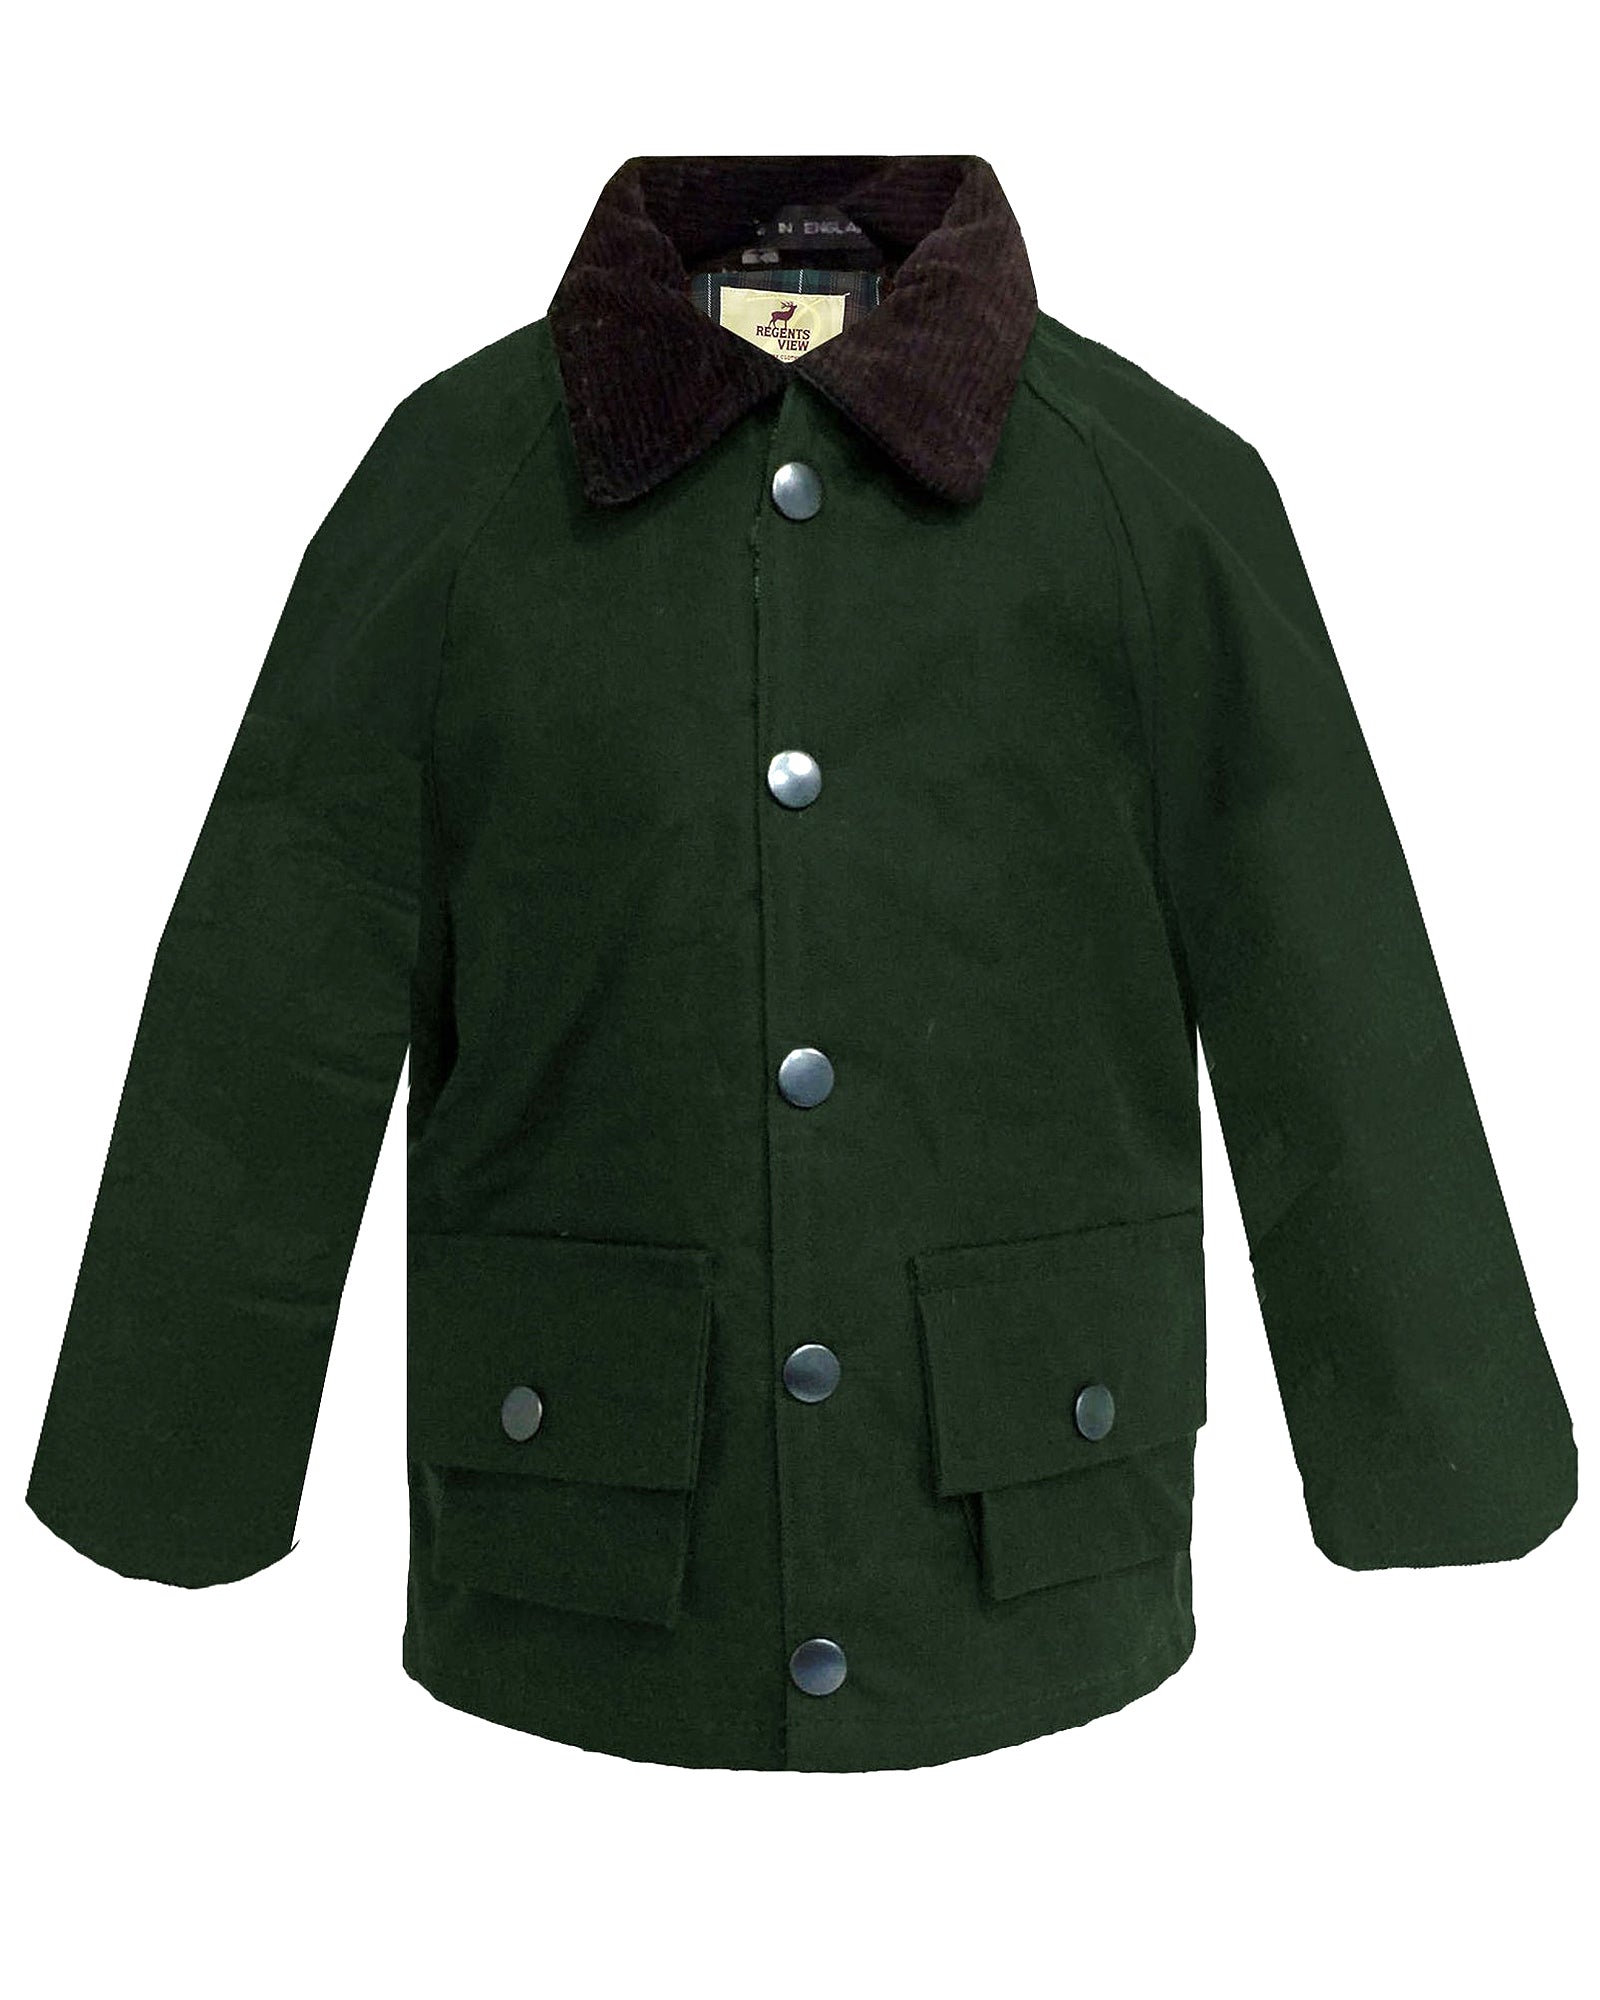 Regents View Childrens 100% Waxed Cotton Jacket - Olive